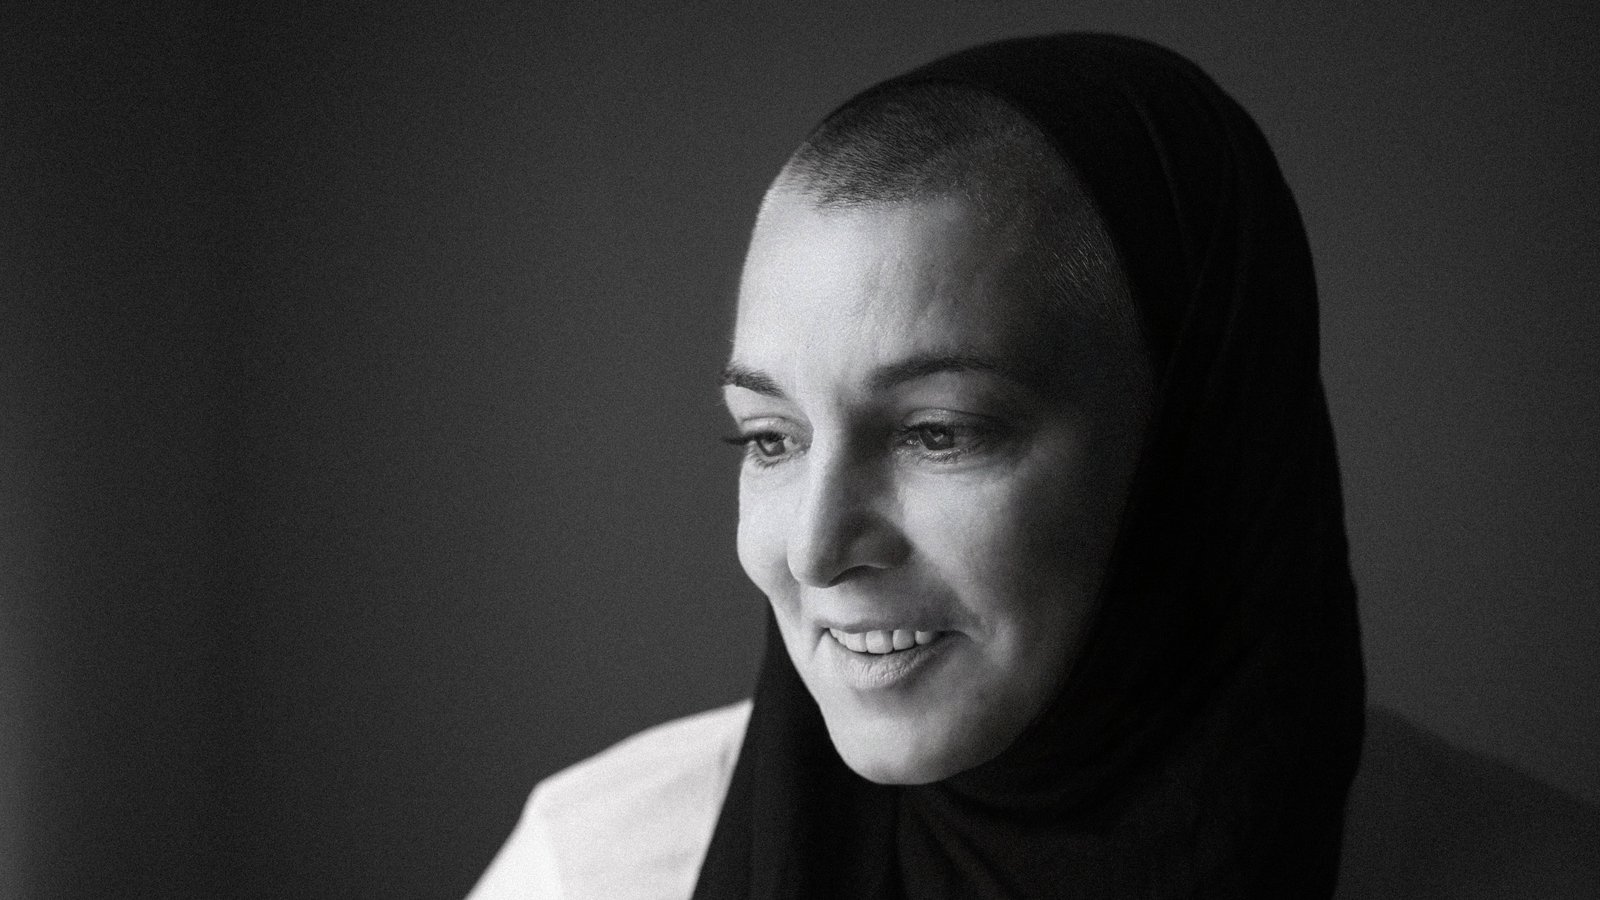 Sinéad O'Connor dedicates new song to BLM movement - RTE.ie